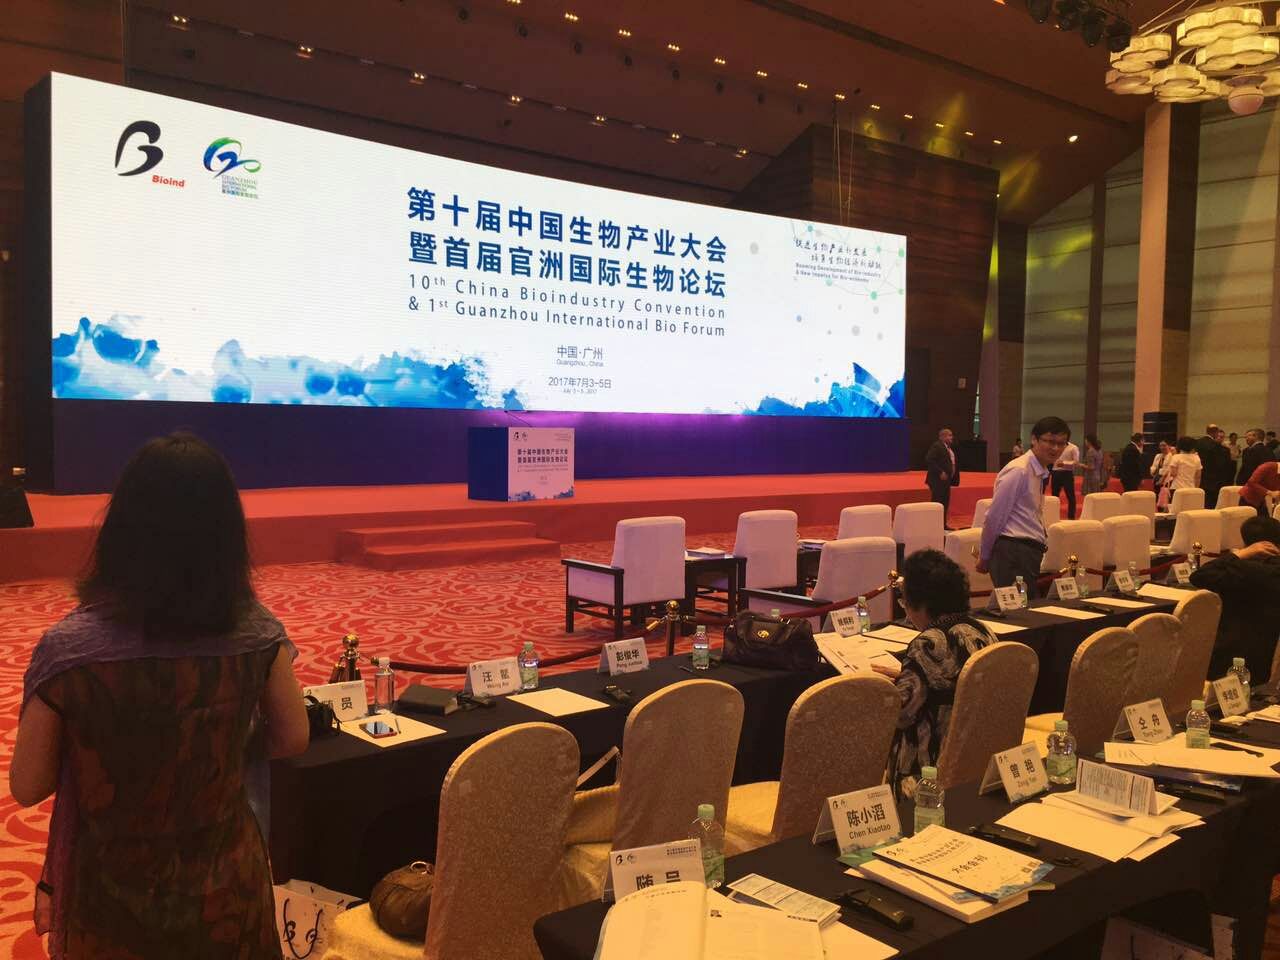 Professor Wang at Abebio was invited to attend 10th China Bio-industry Convention